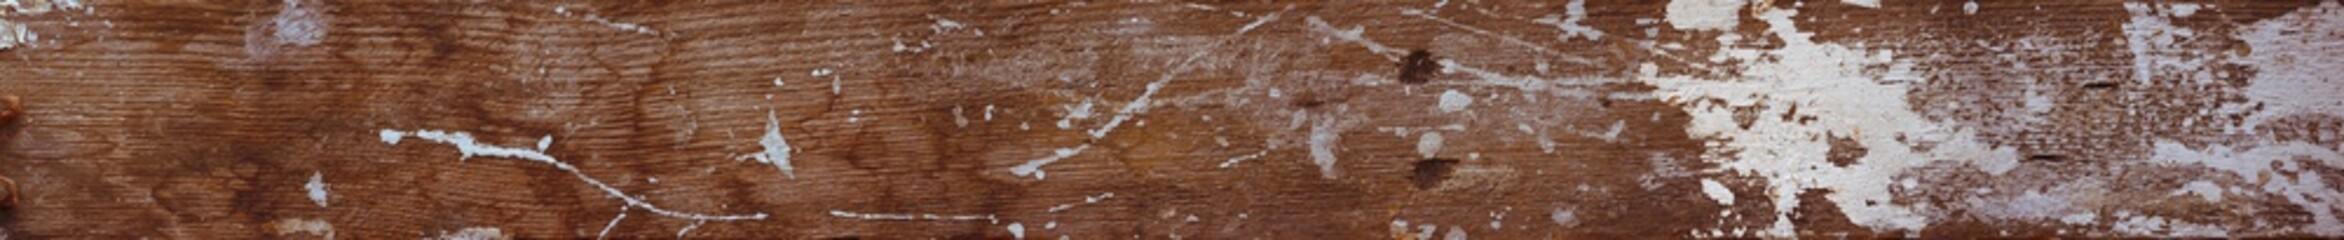 The surface of an old wooden board with stains of paint